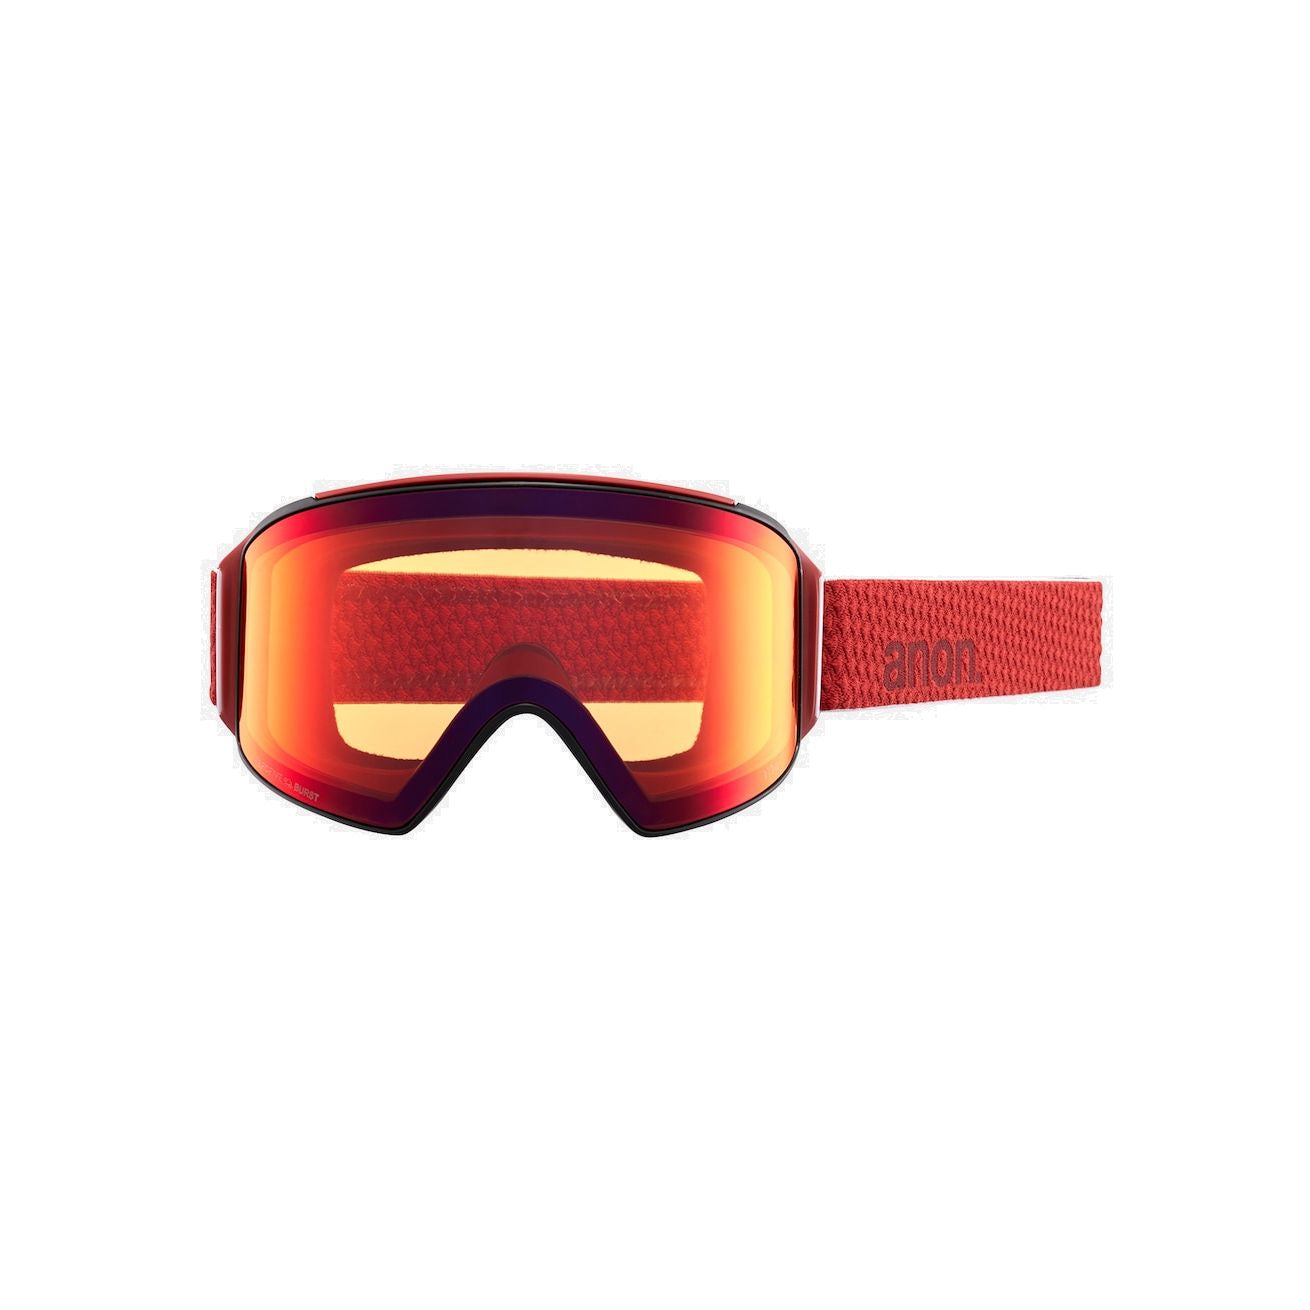 Anon M4 Cylindrical Goggles + Bonus Lens + MFI Face Mask - Low Bridge Fit - Openbox Mars Perceive Sunny Red - Anon Snow Goggles